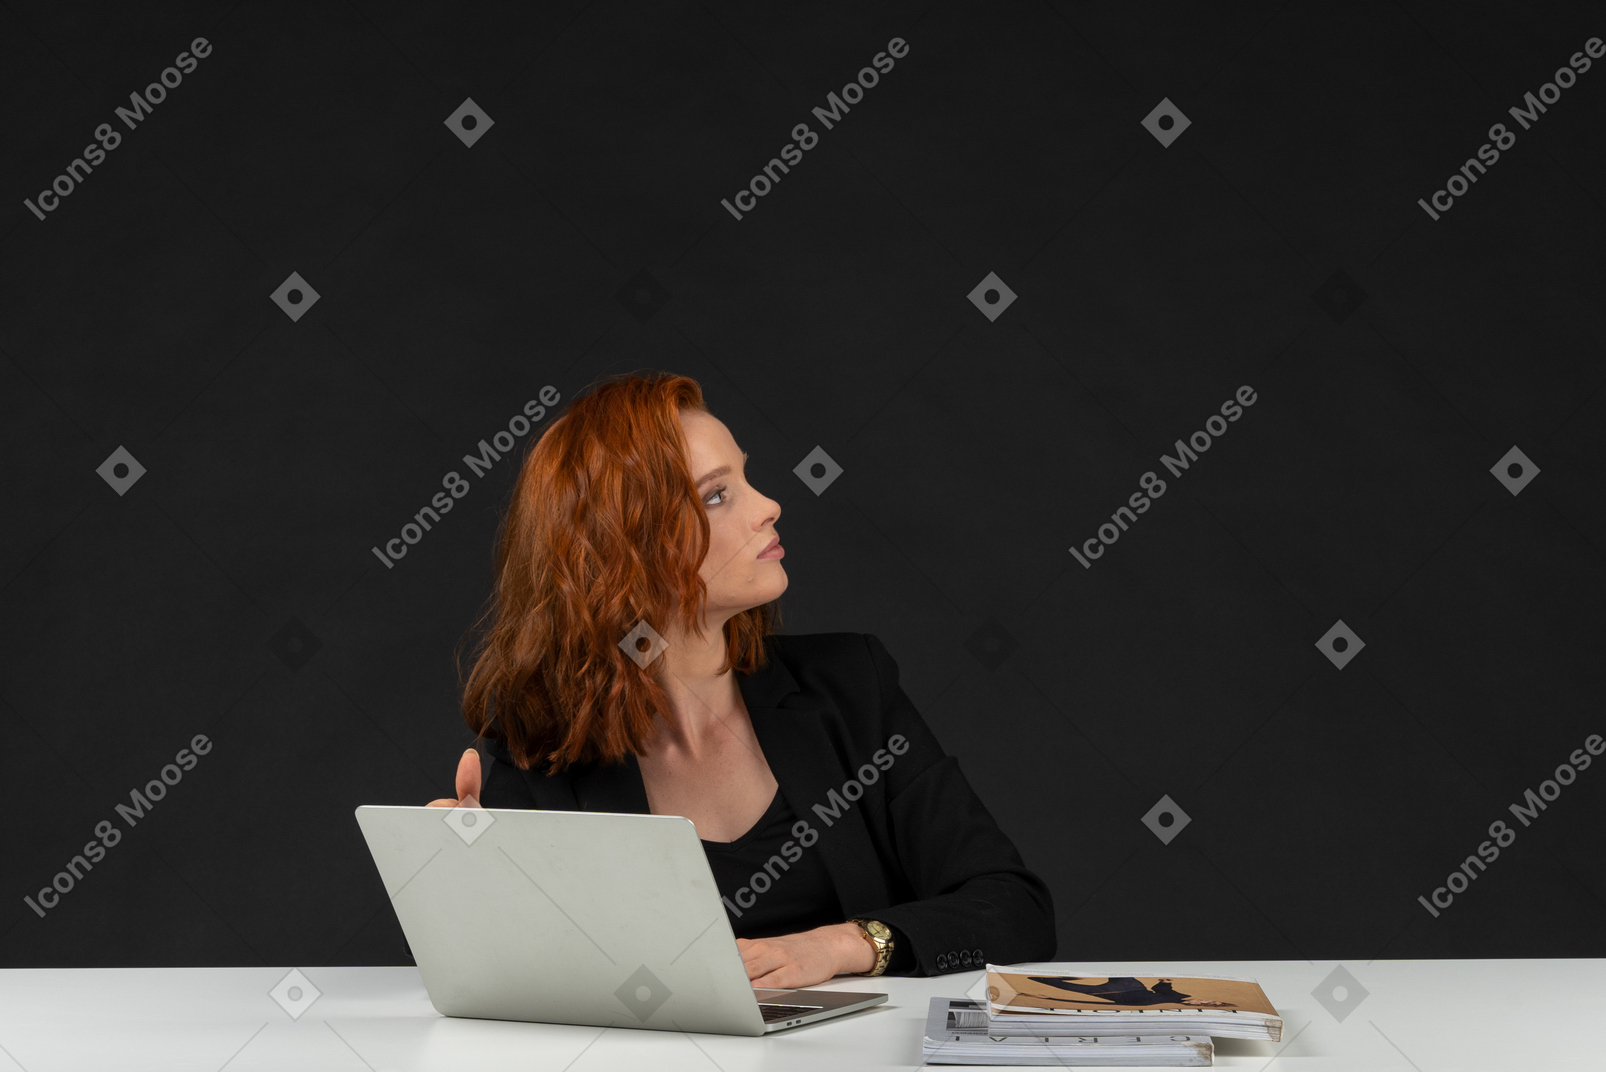 Distracted young woman sitting at laptop